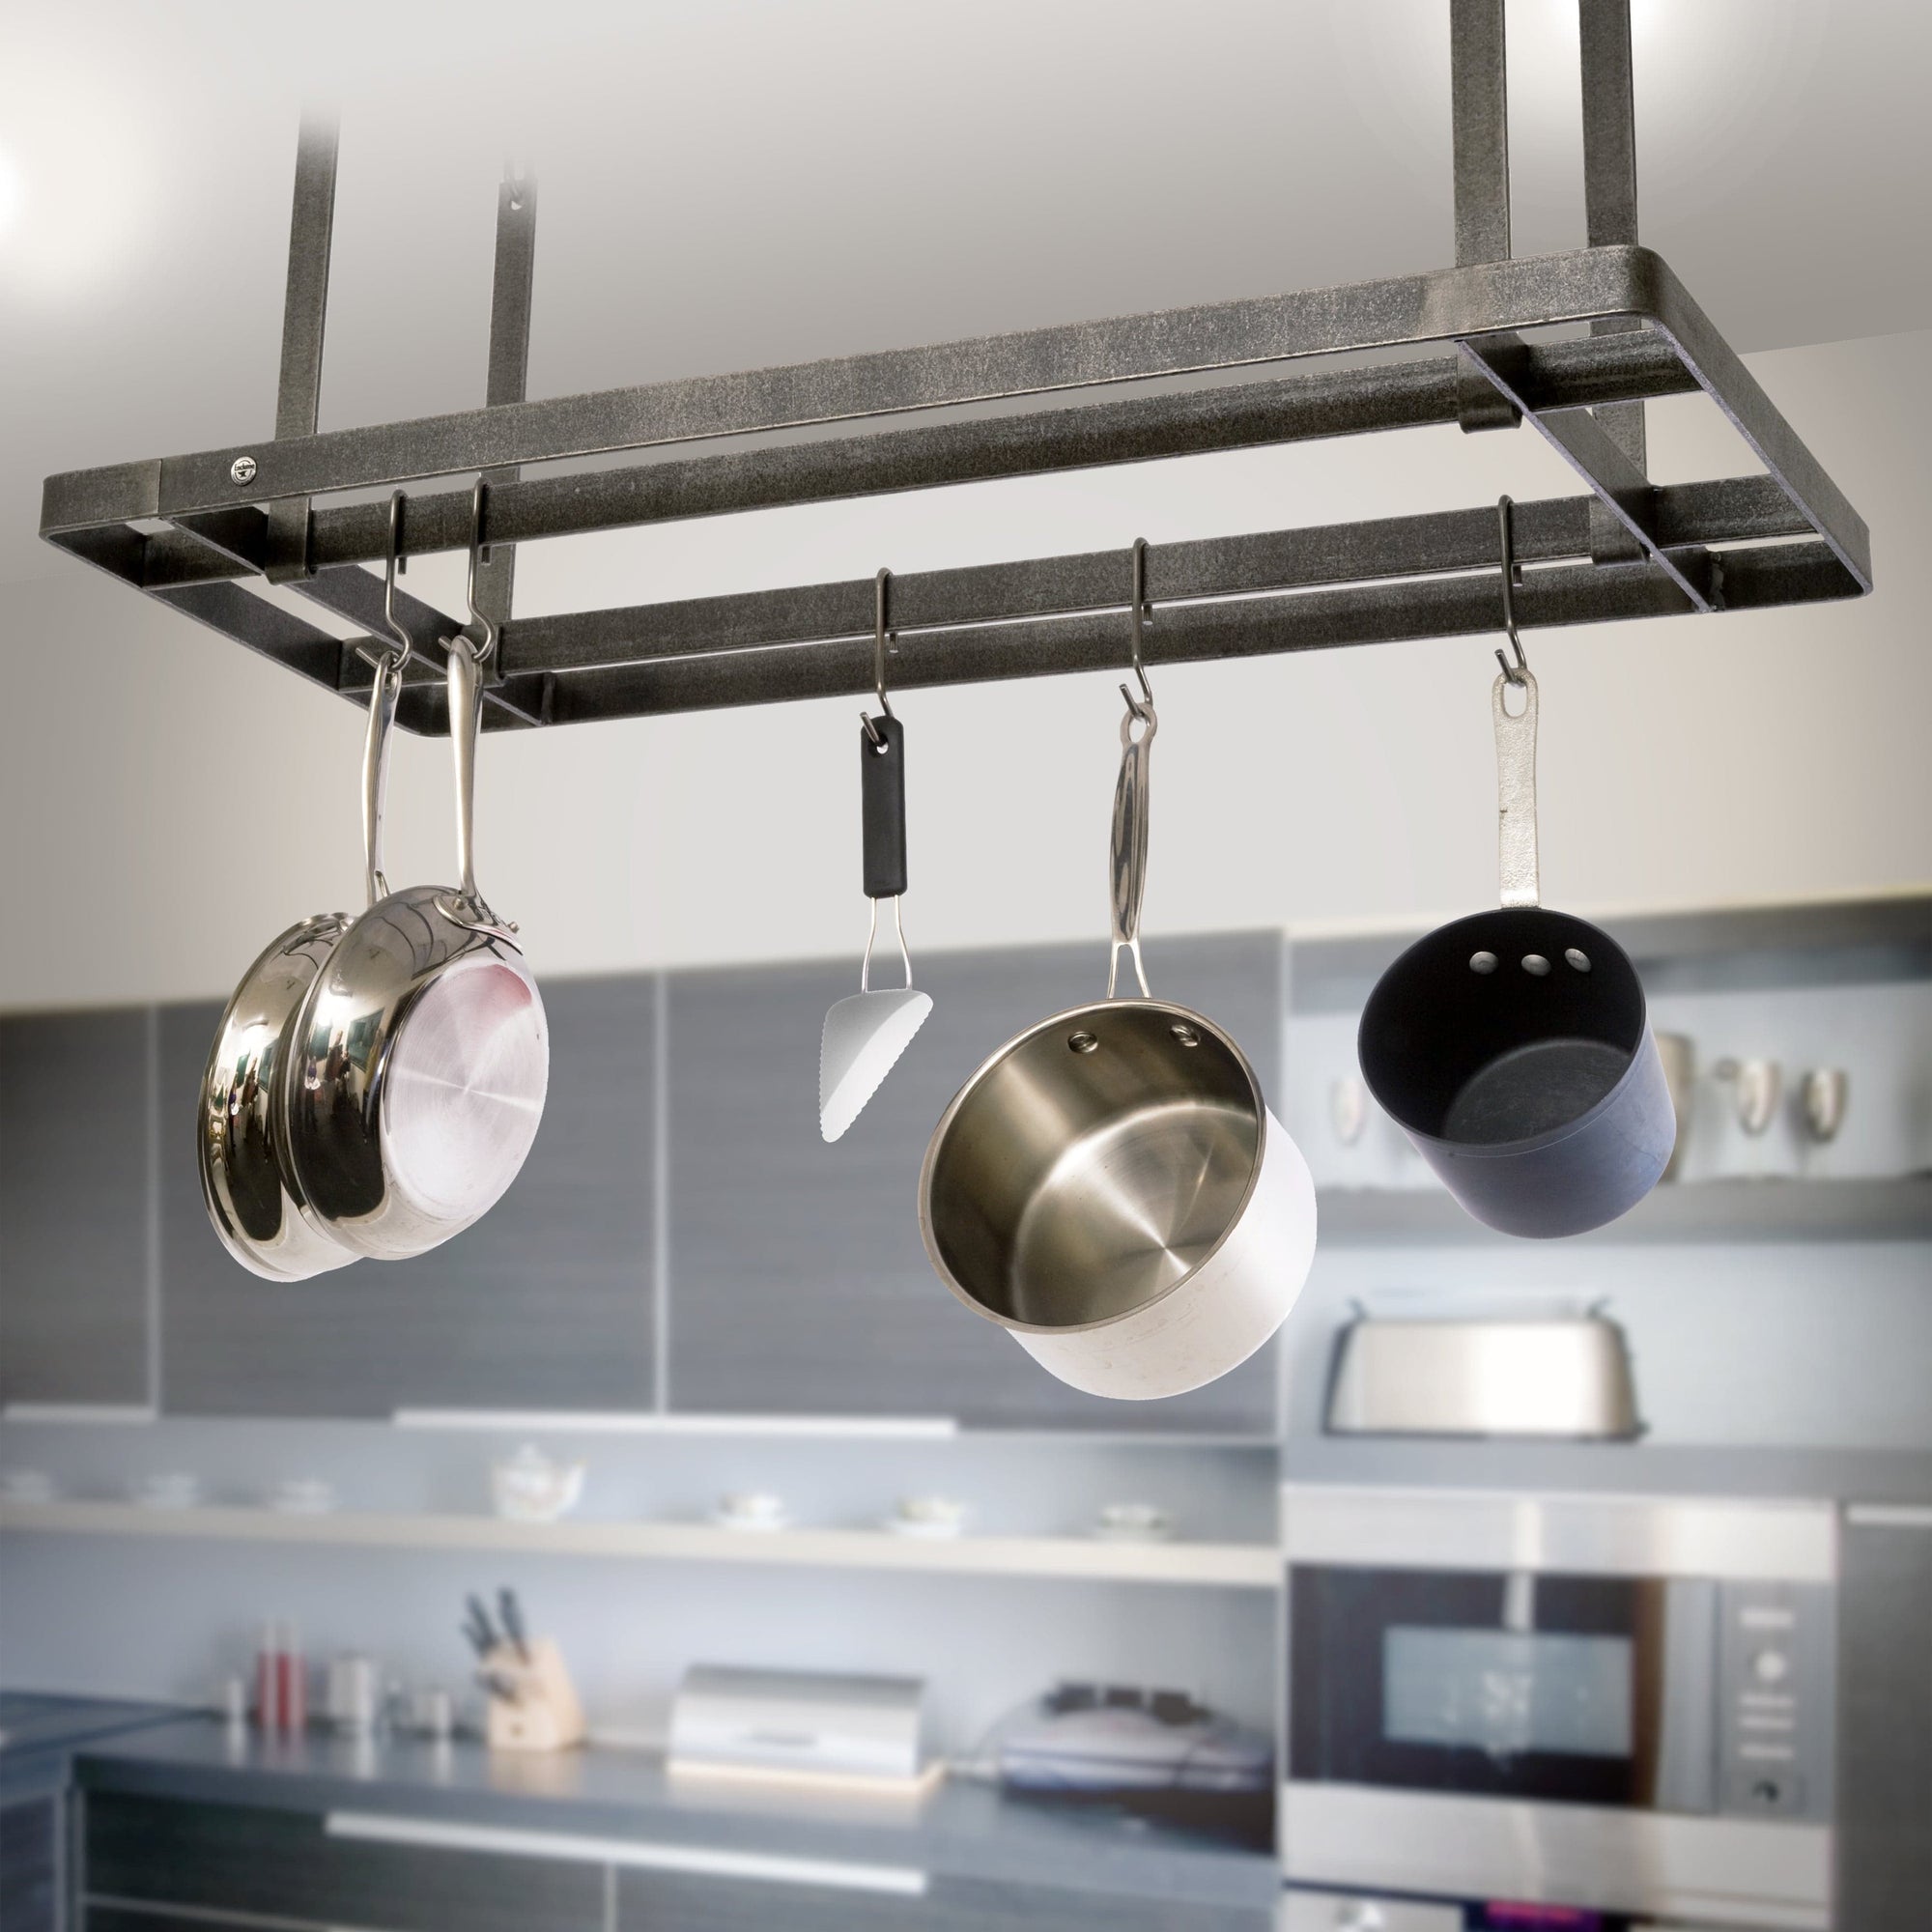 All Bars Ceiling Pot Rack W 12 Hooks In Hammered Steel Enclume Design Products